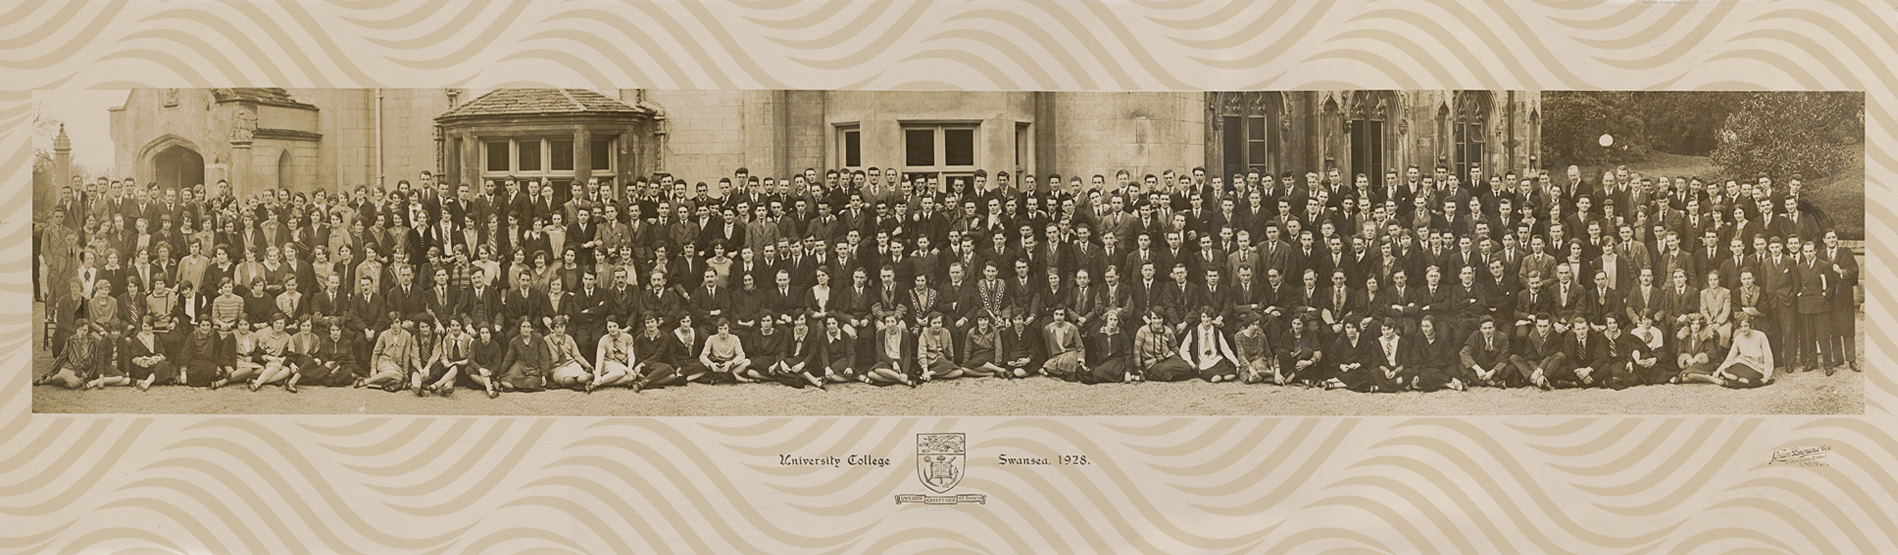 university class photo from 1926 in front of the abbey